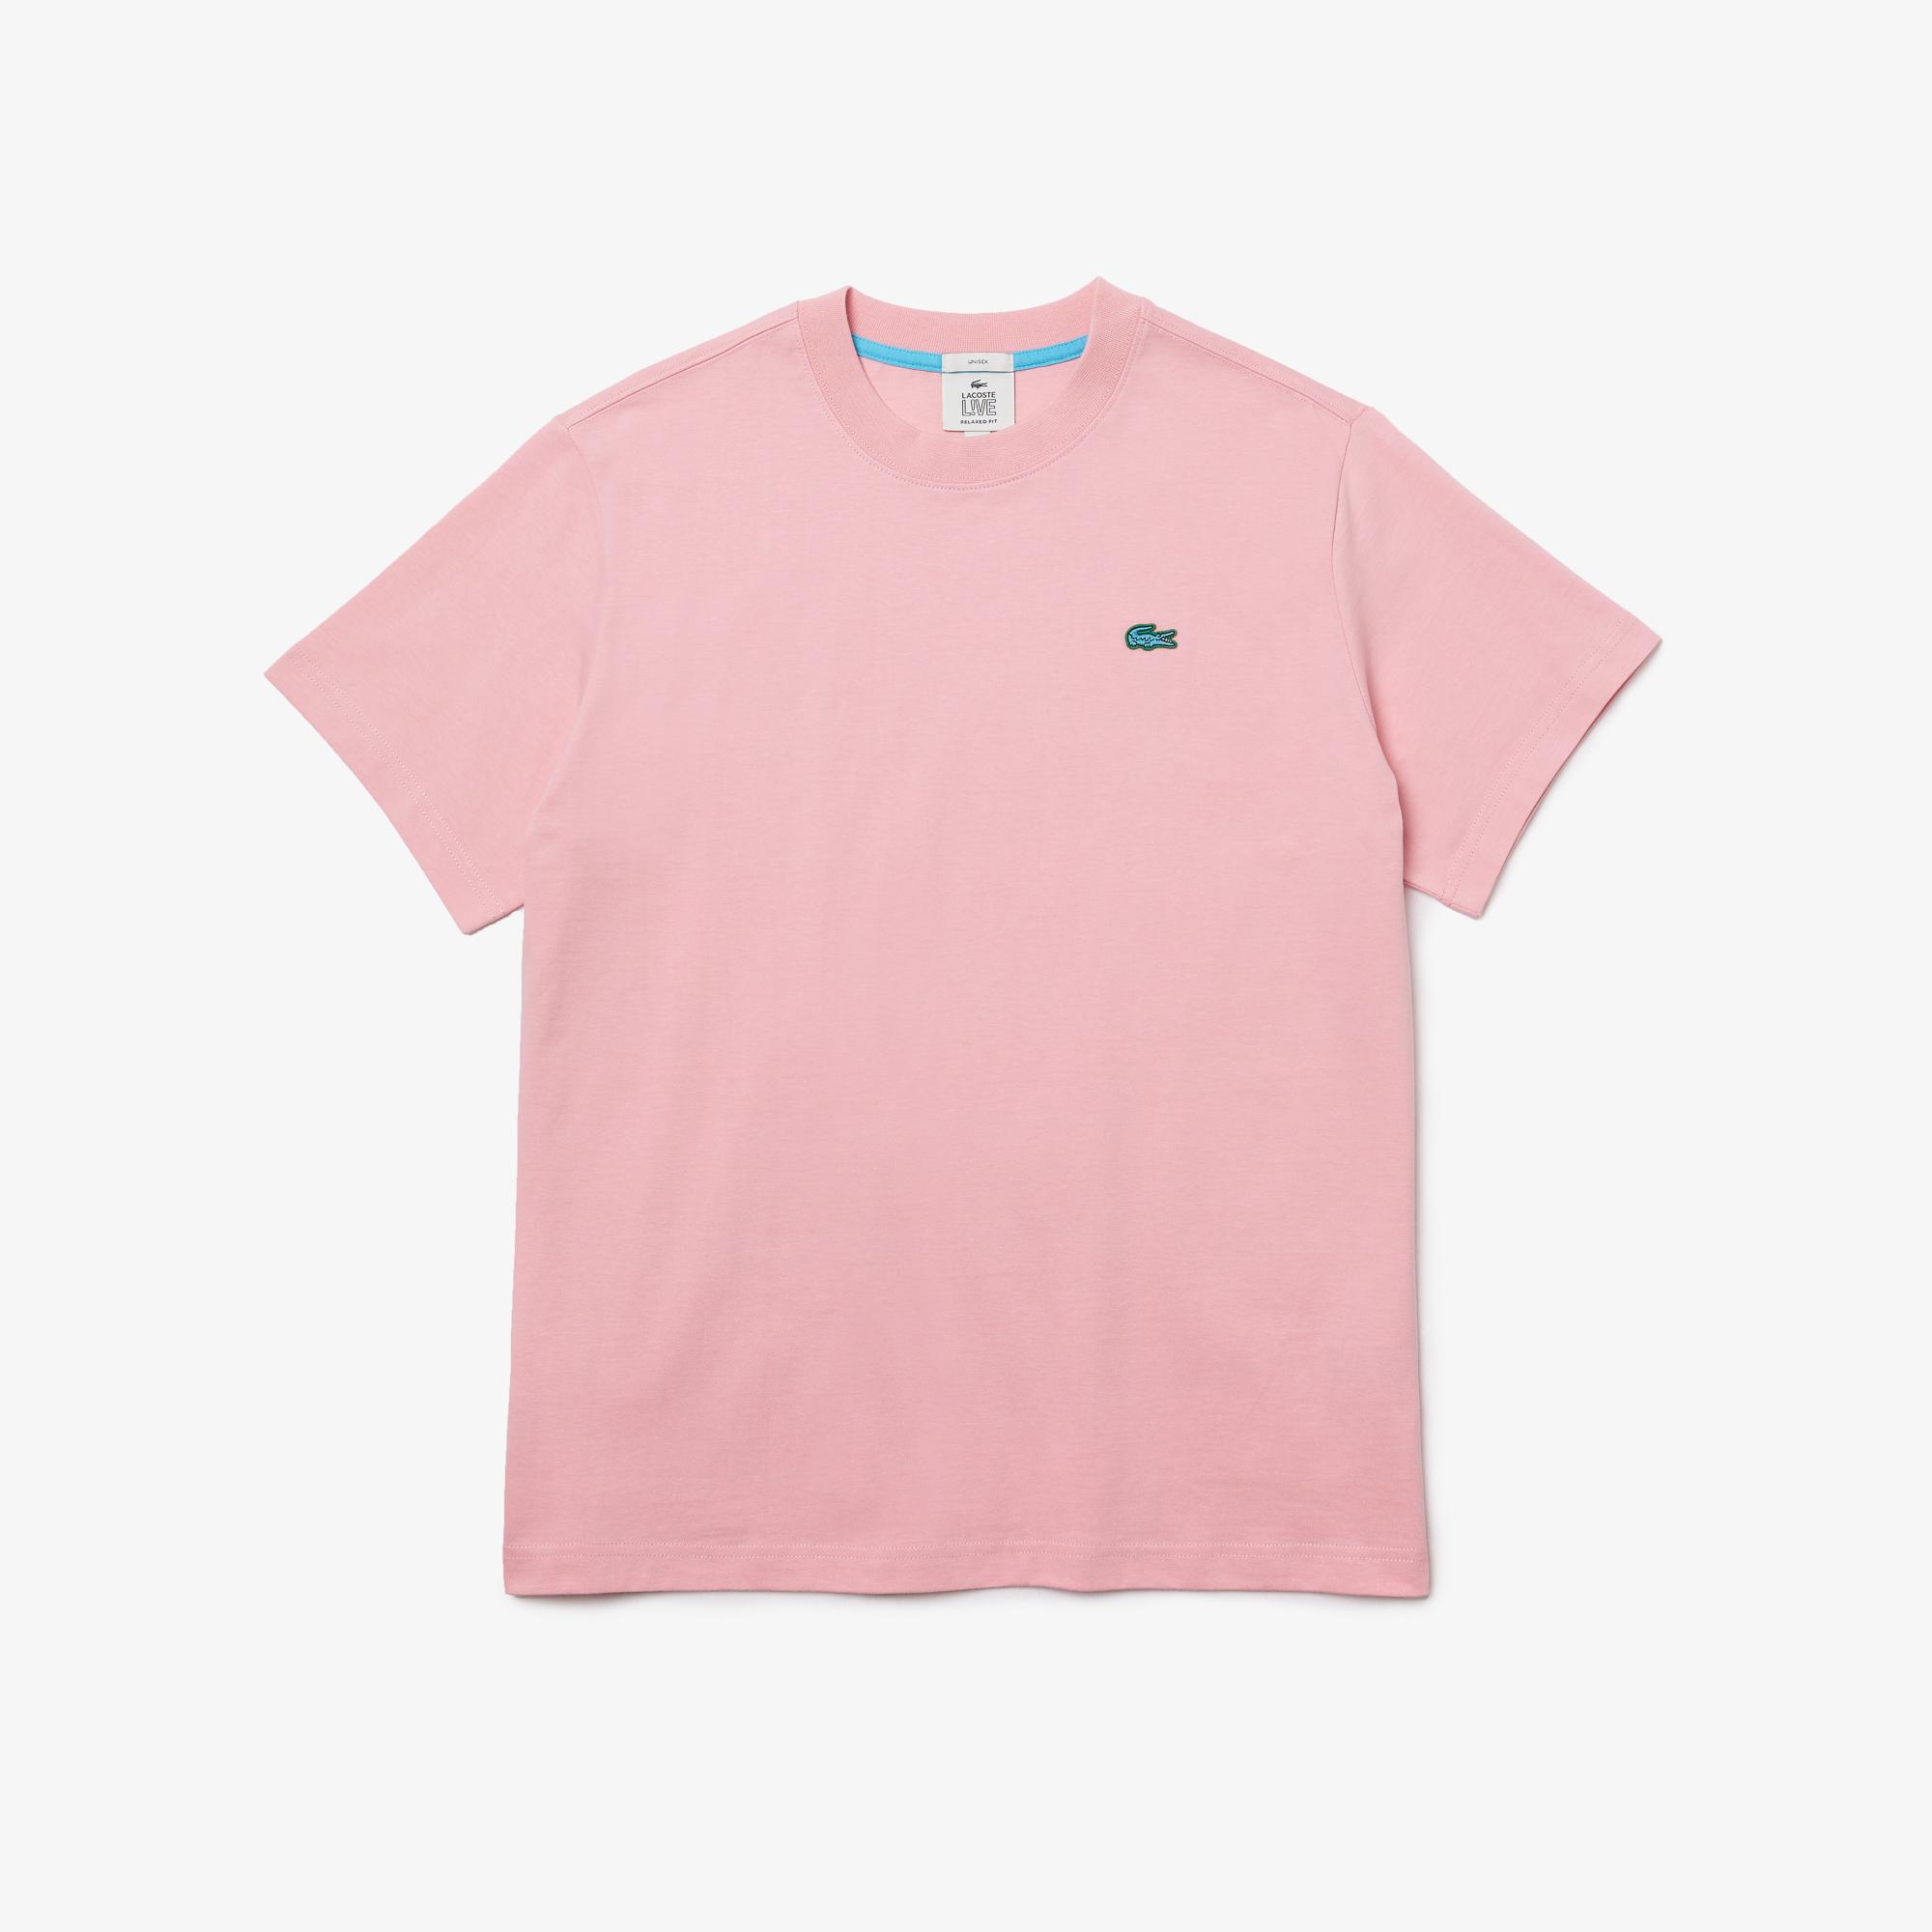 Lacoste L!VE Unisex Relaxed Fit Bisiklet Yaka Pembe T-Shirt. 5